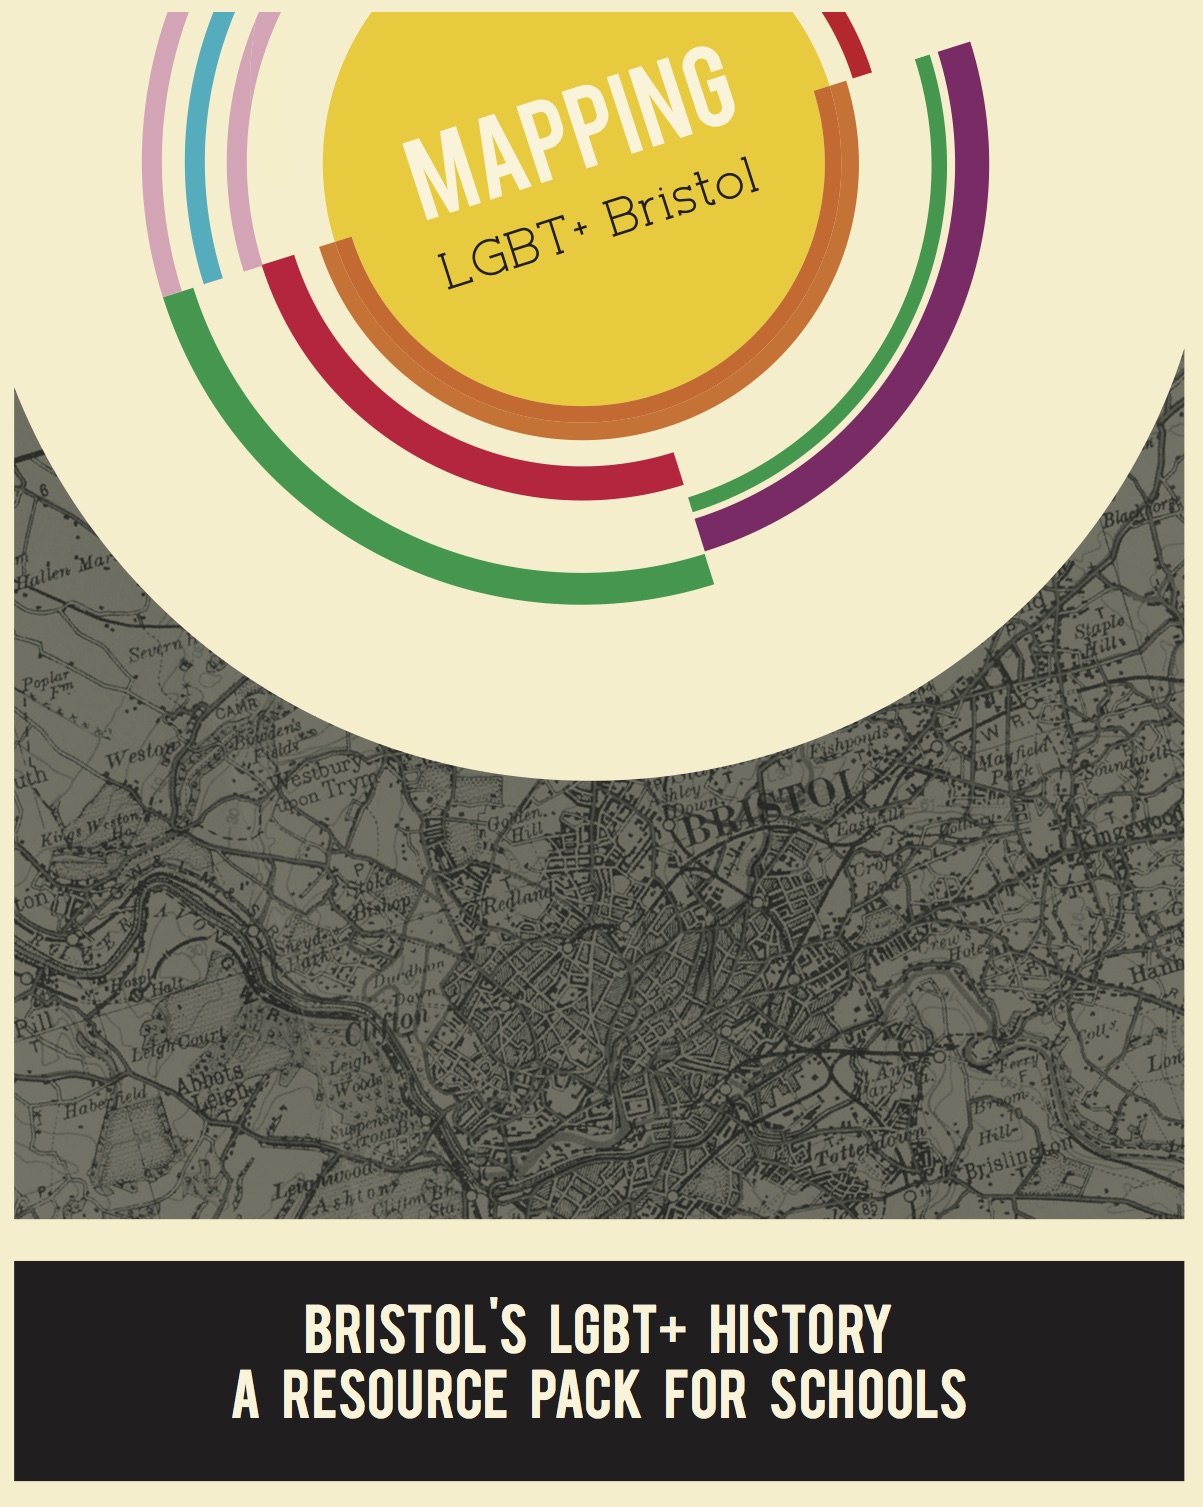 Rainbow circles surround text reading 'Mapping LGBT+ Bristol' superimposed on a black and white map of bristol